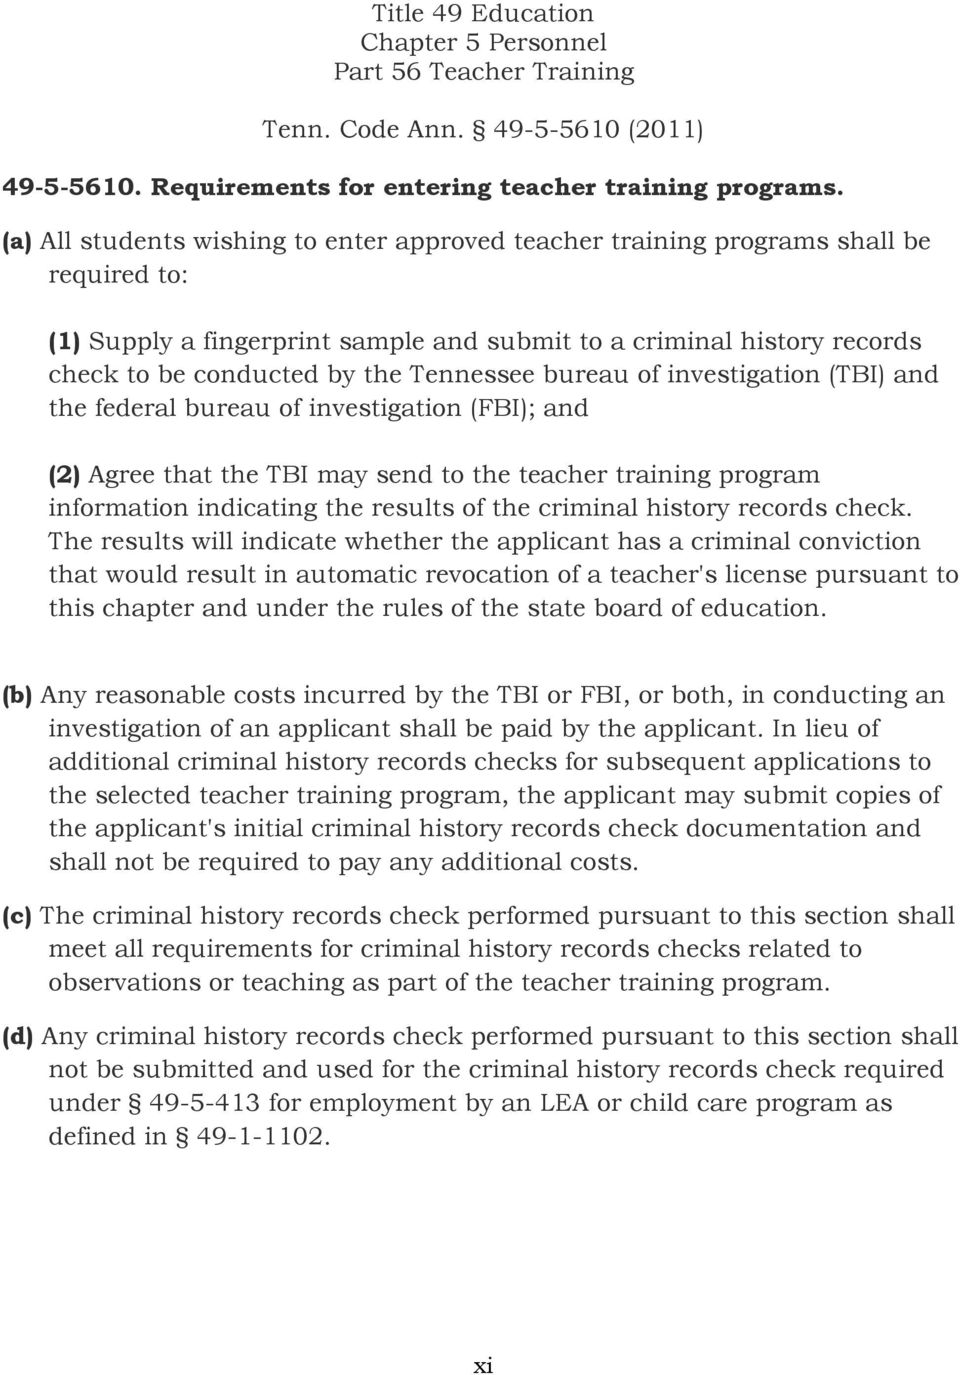 Tennessee bureau of investigation (TBI) and the federal bureau of investigation (FBI); and (2) Agree that the TBI may send to the teacher training program information indicating the results of the